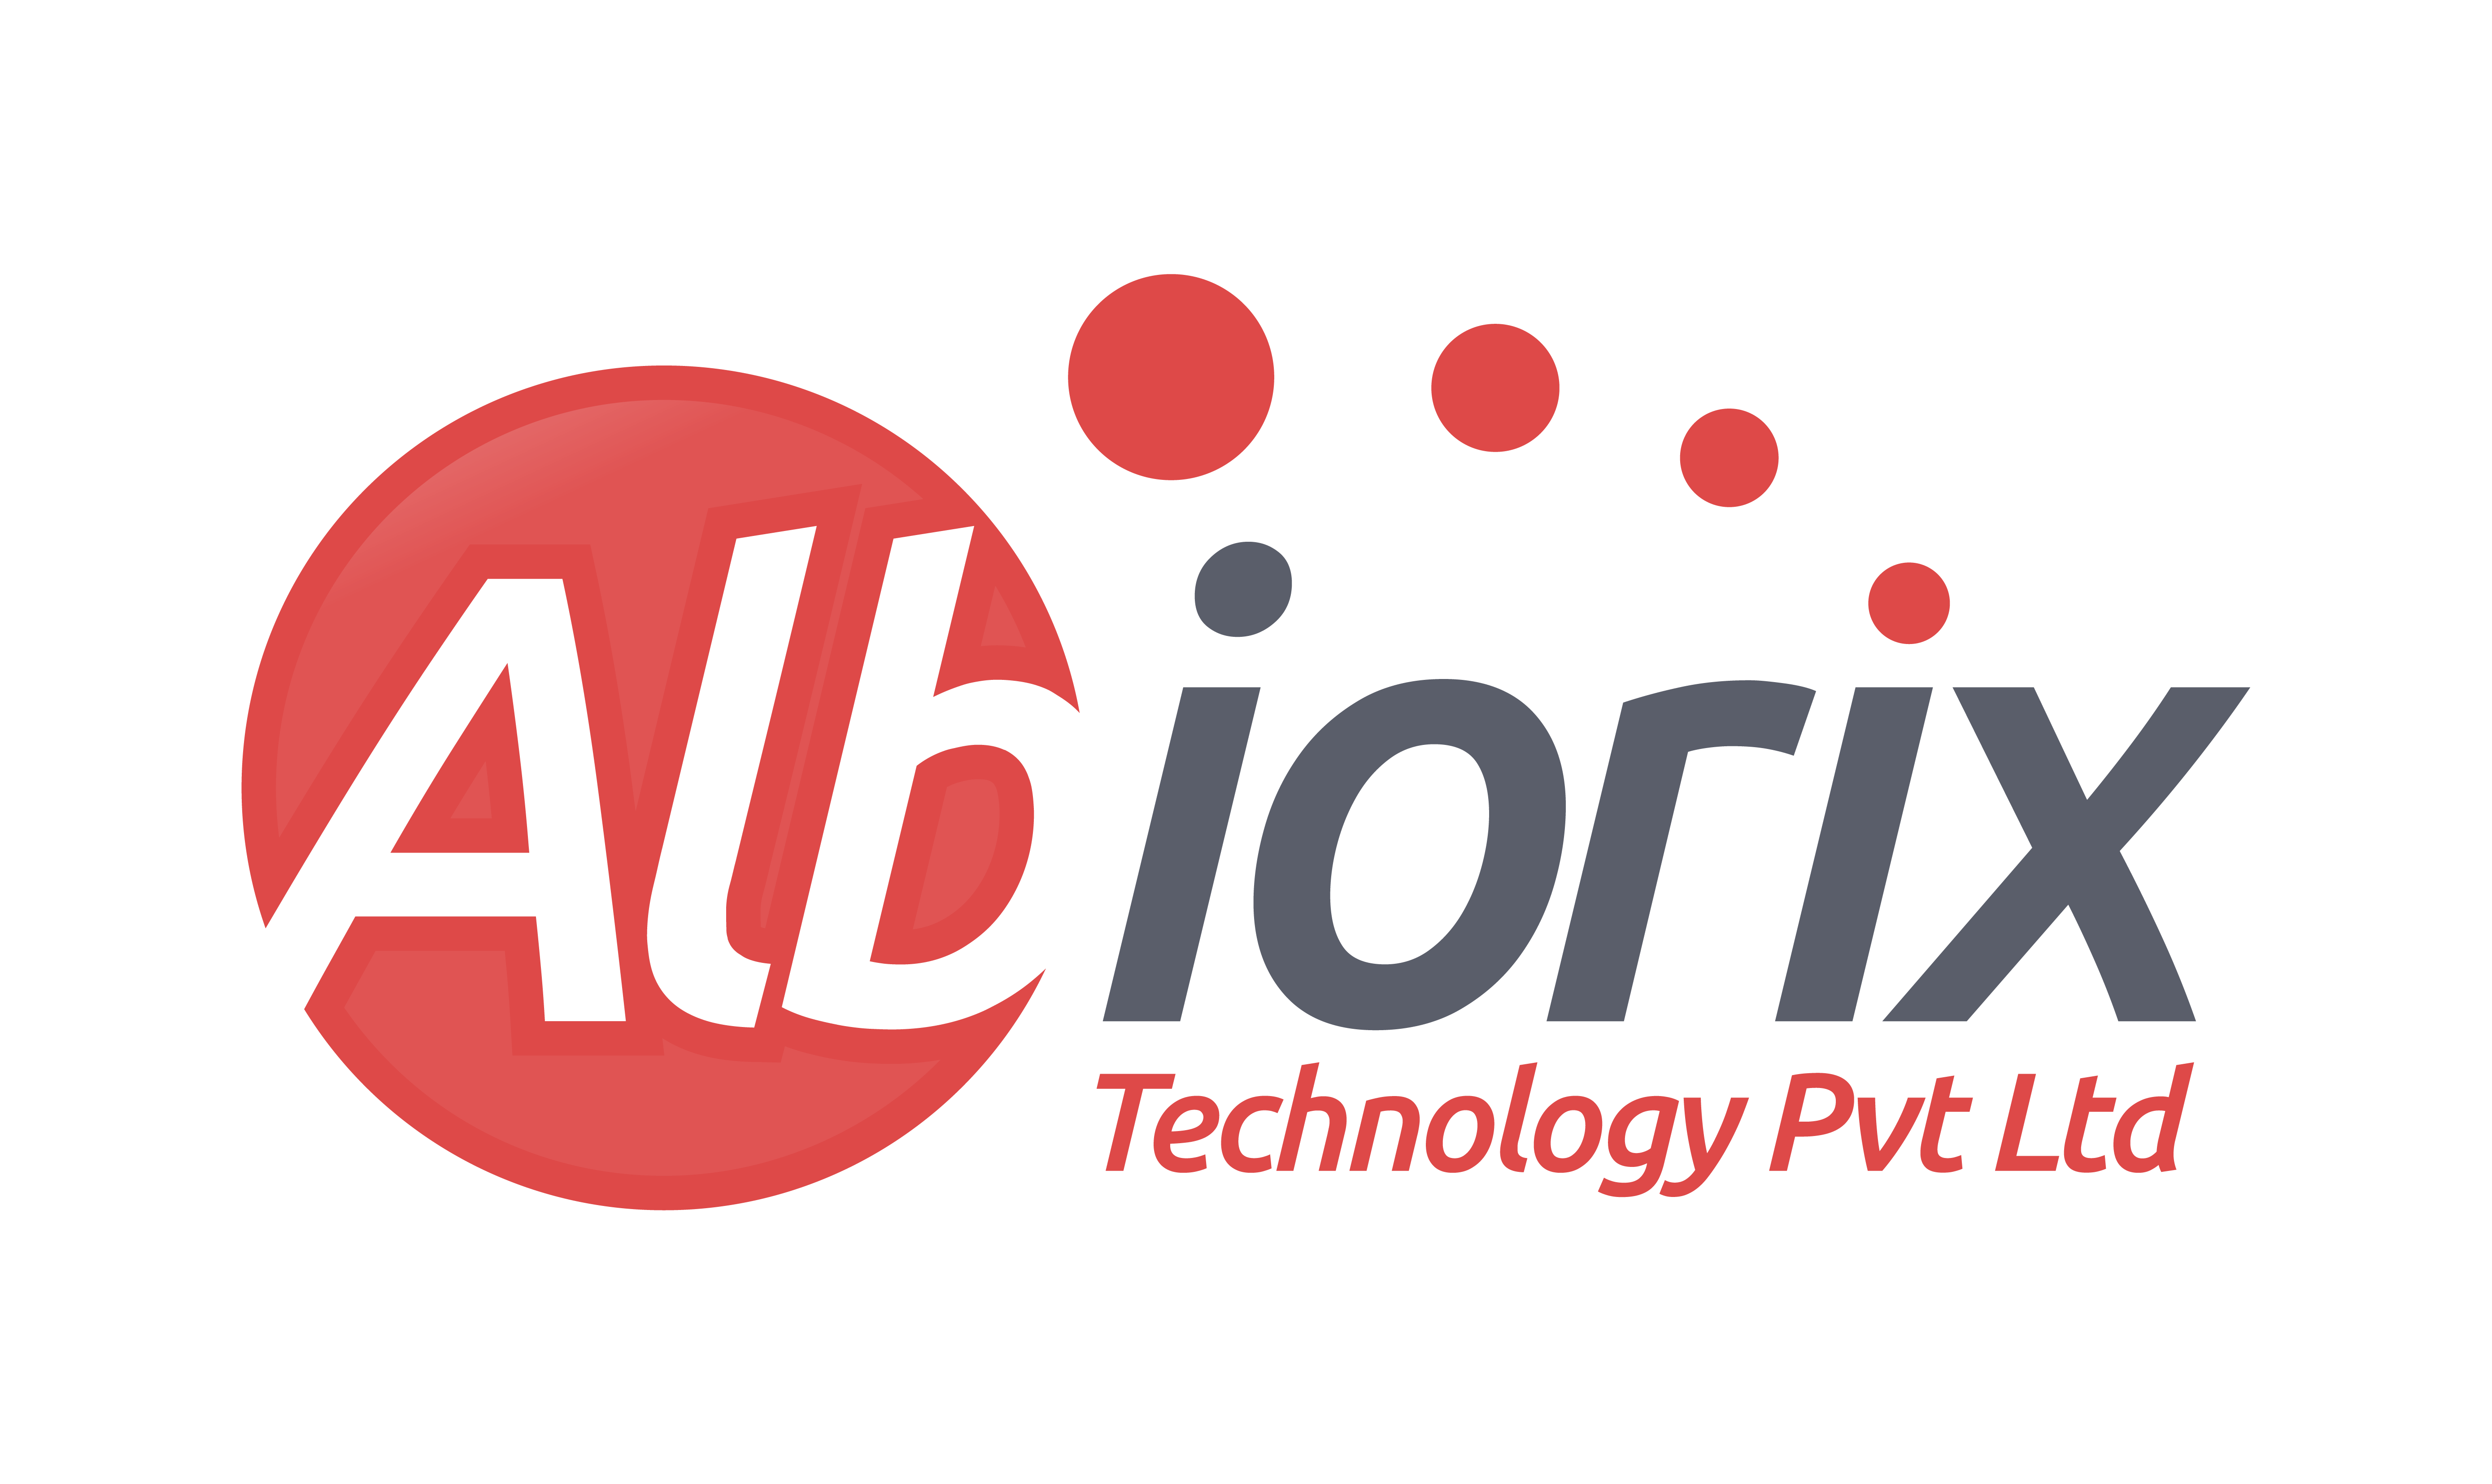 https://salesprofessionals.co.in/company/albiorix-technology-pvt-ltd